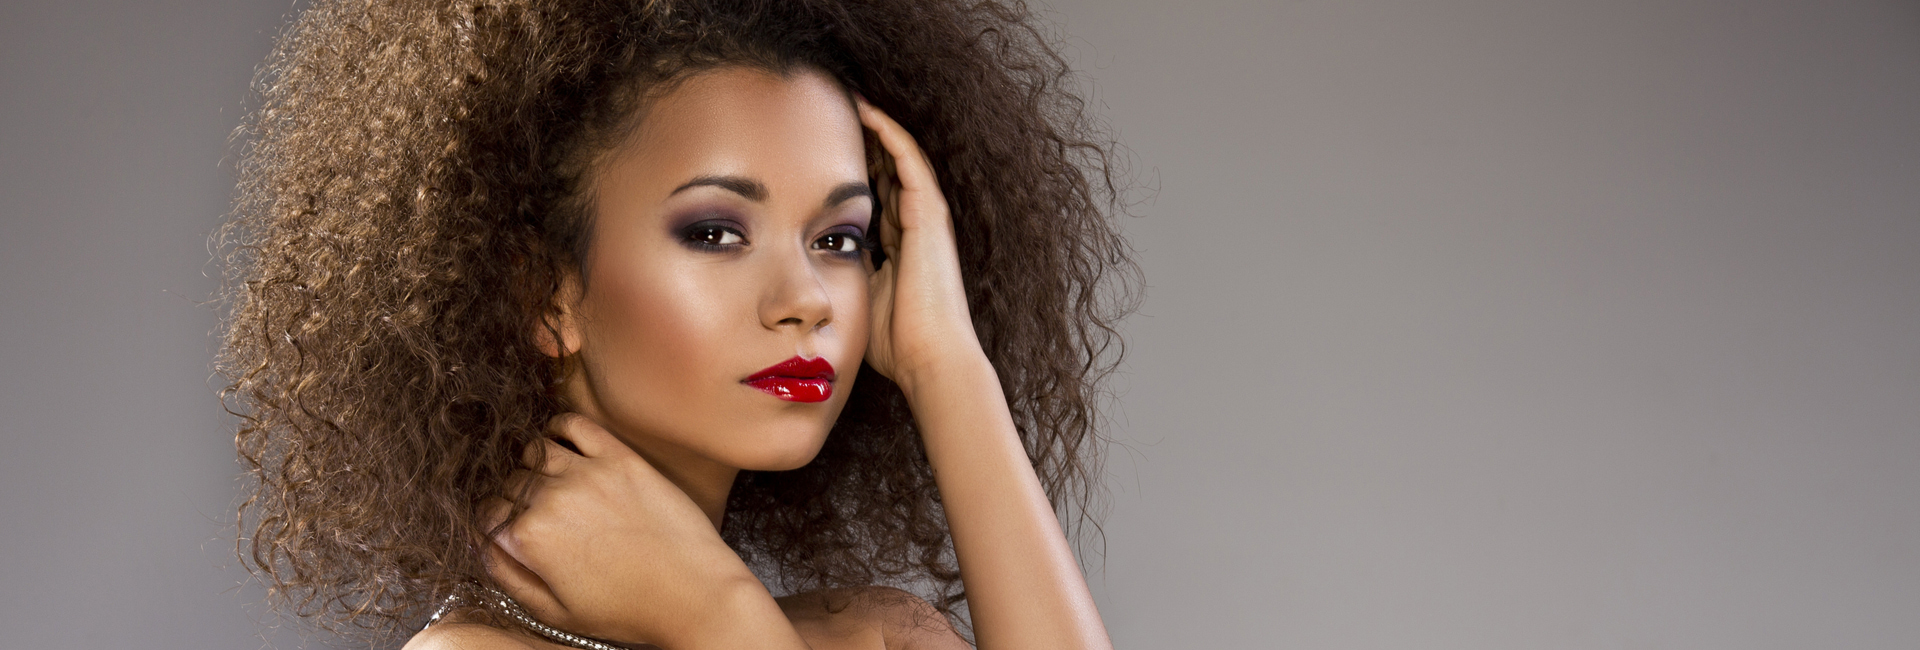 Beautiful woman with curly hair and red lipstick